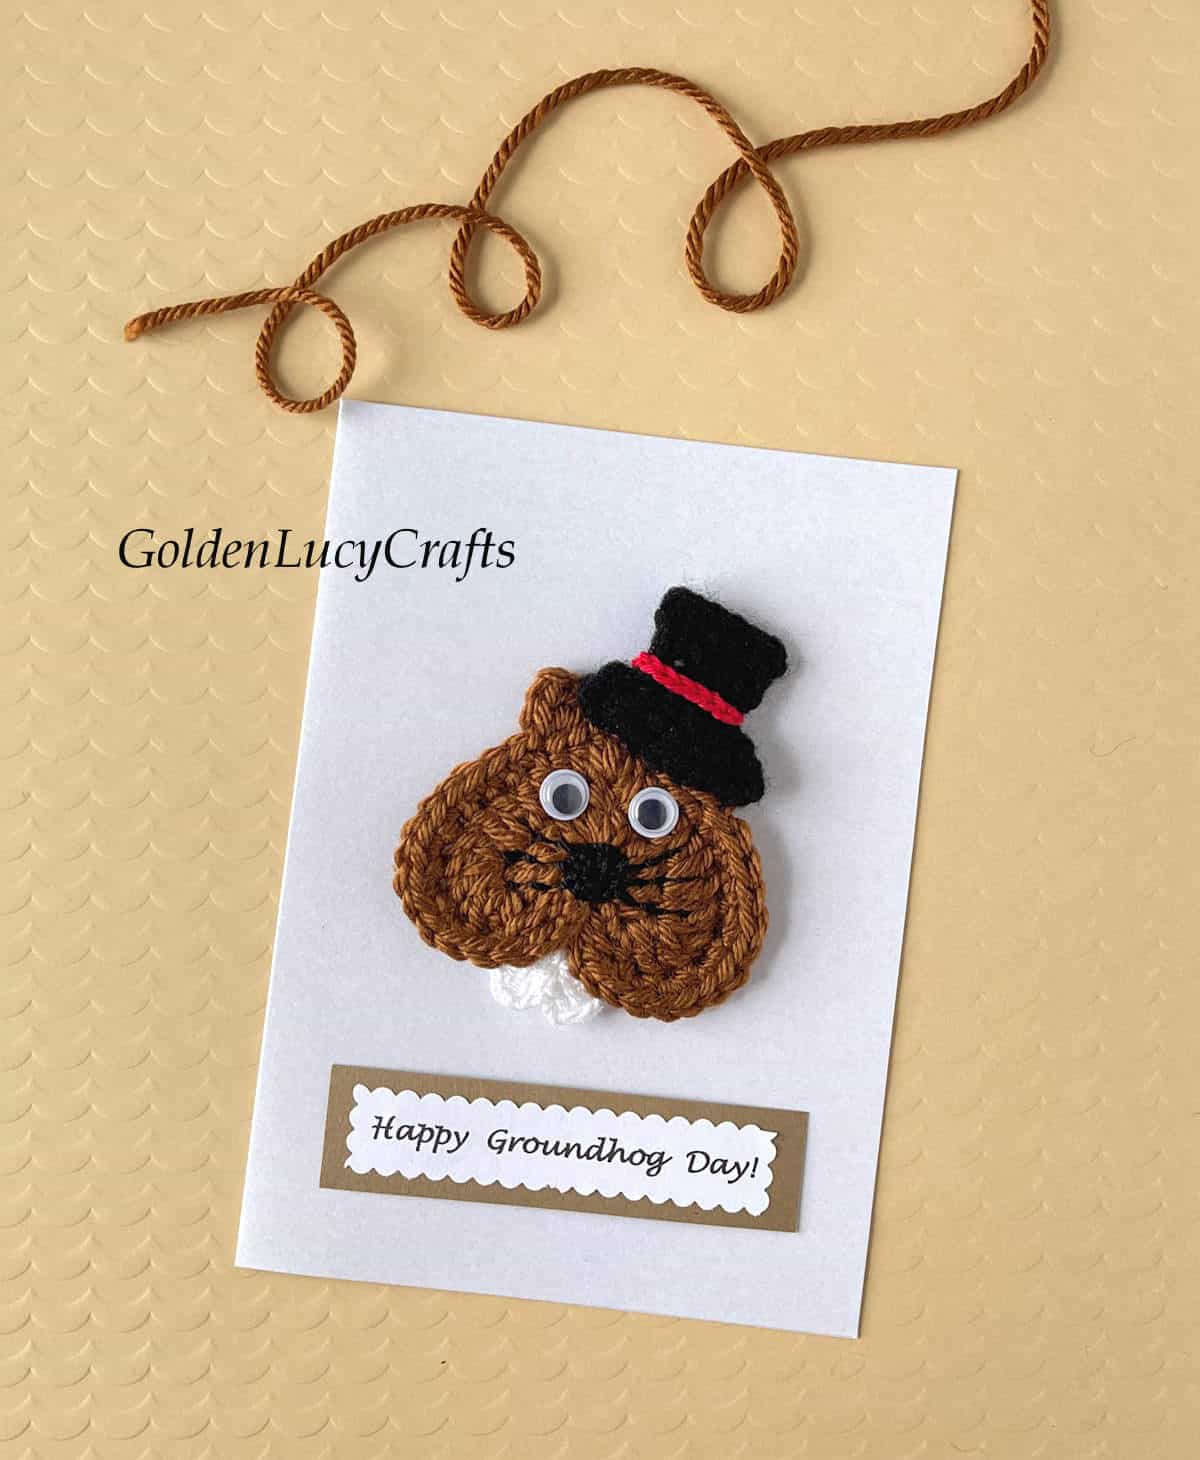 Crochet groundhog applique on white card, note saying "Happy Groundhog Day!"